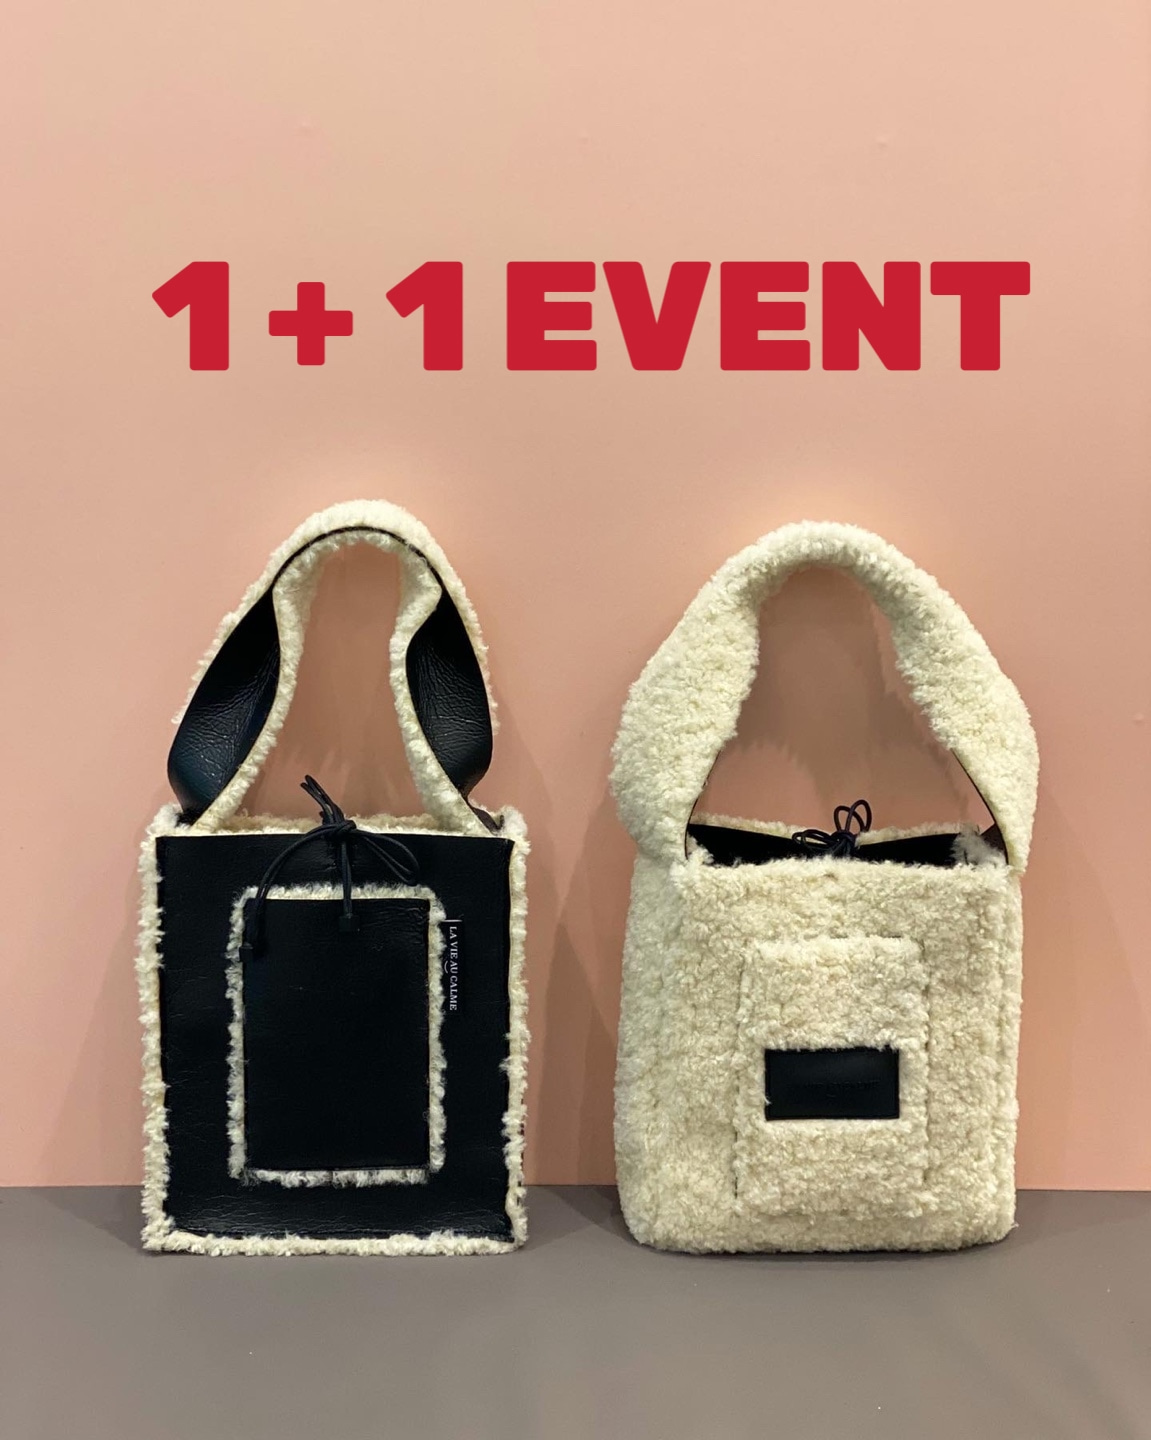 1+1 EVENT !! Double Reversible LaLa Tote bag!